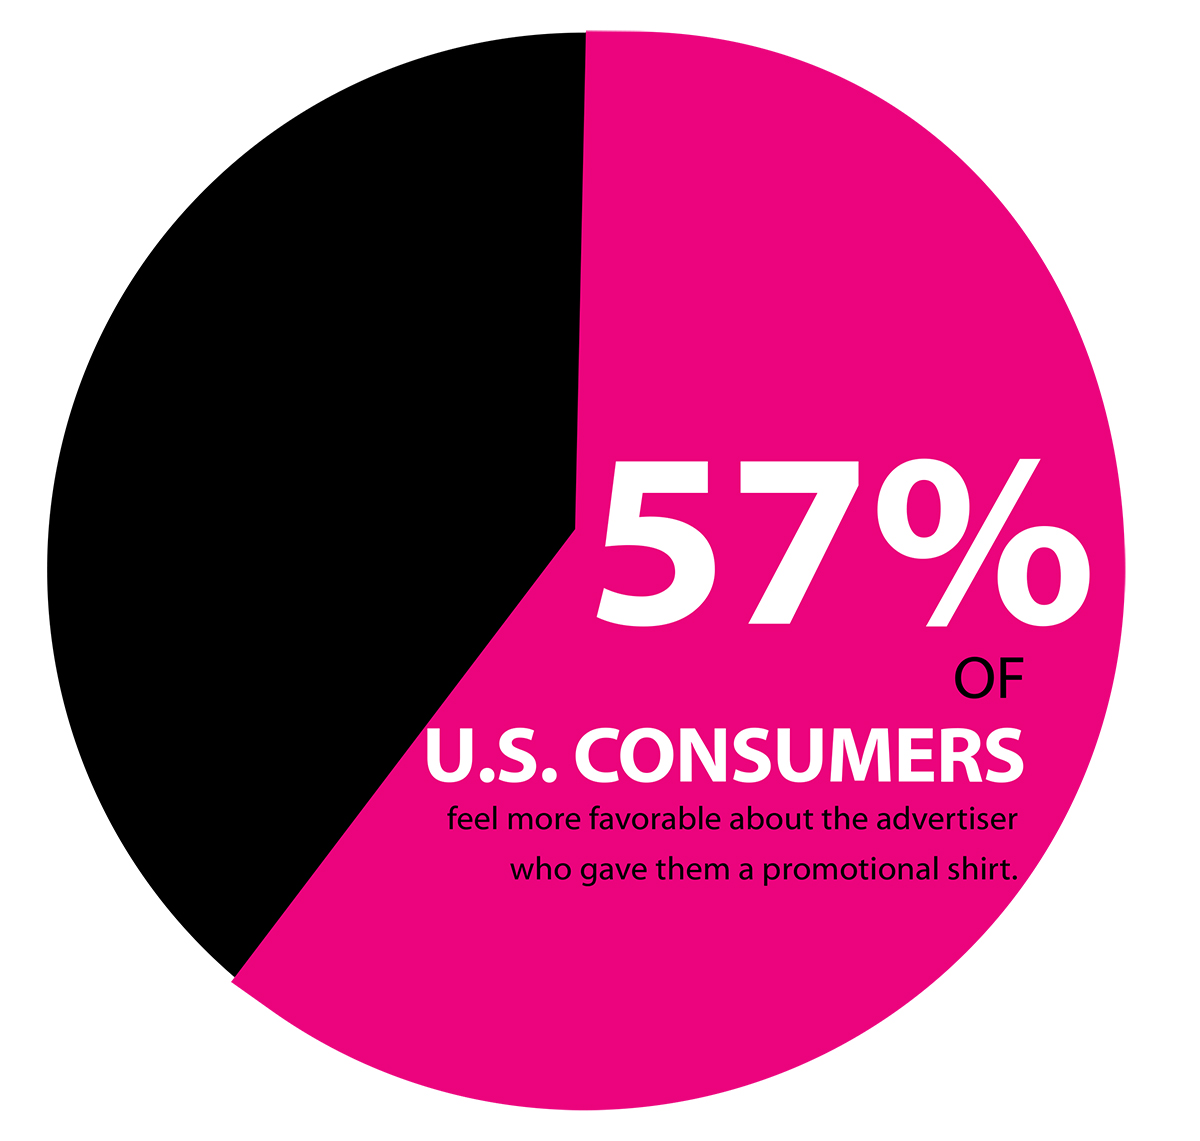 57% of U.S. Consumers feel more favorable about the advertiser who gave them a promotional shirt